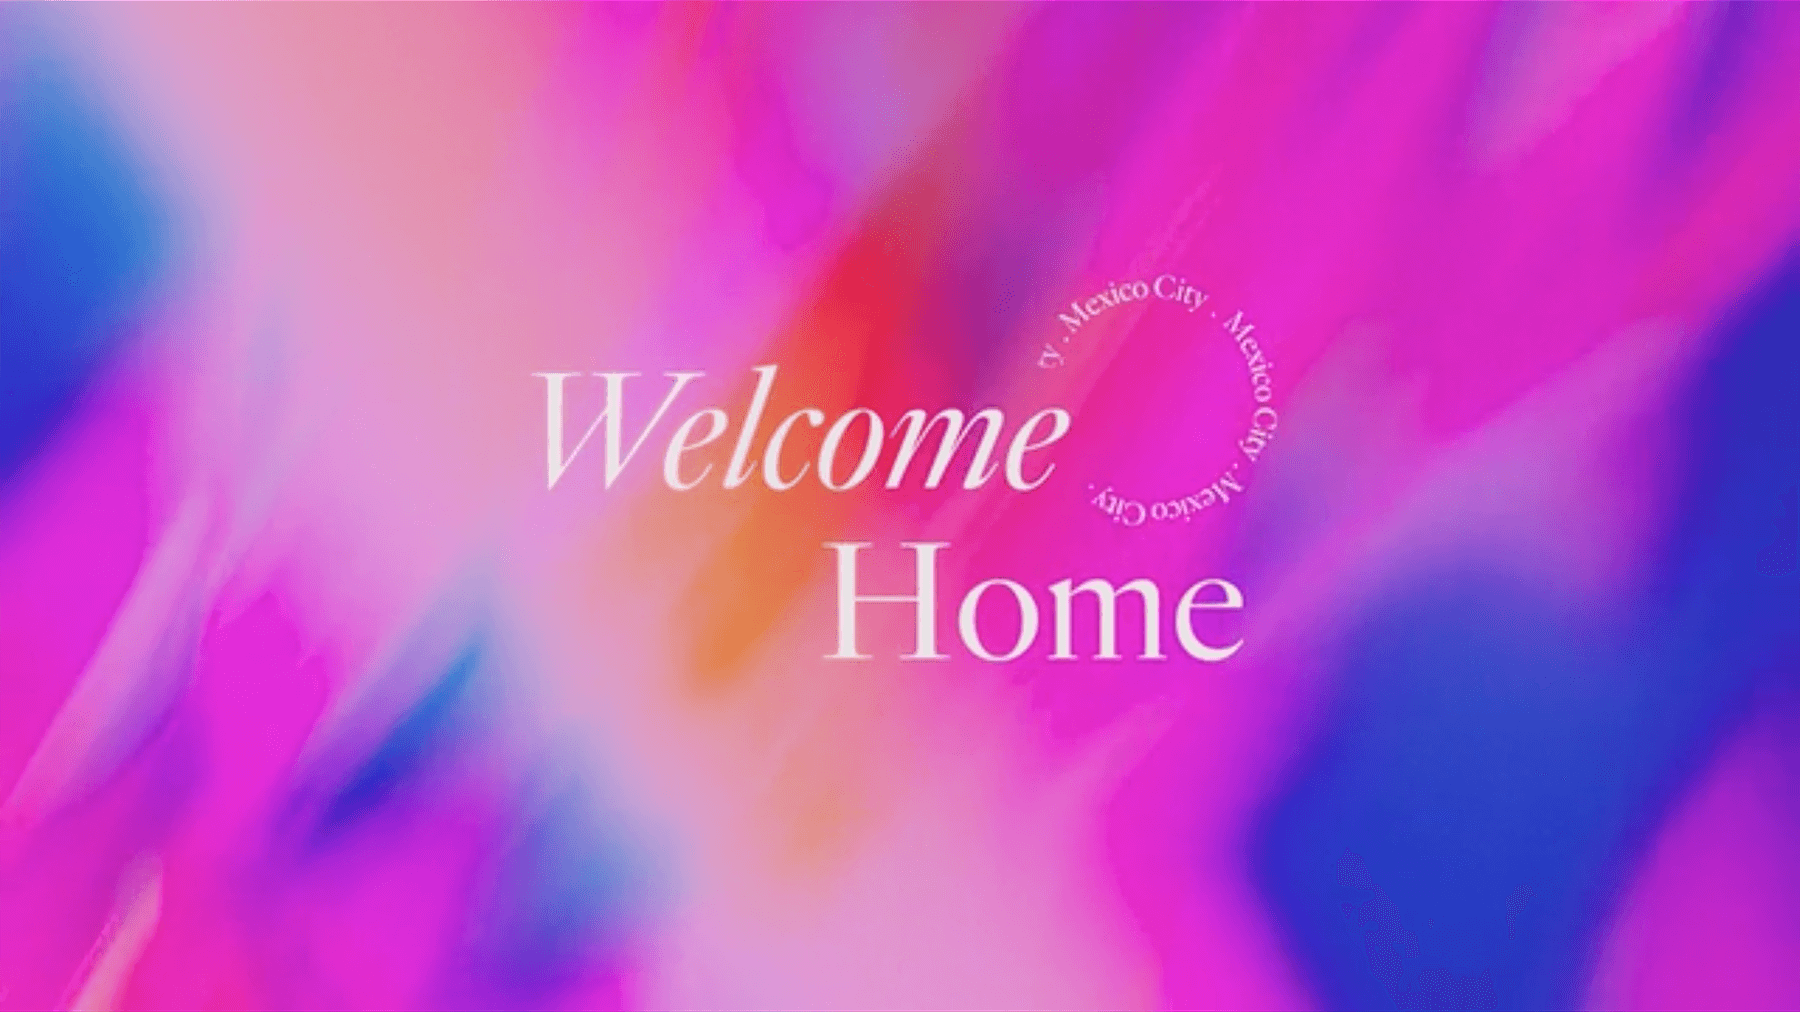 frog_Mexico_City_cover_welcome_home